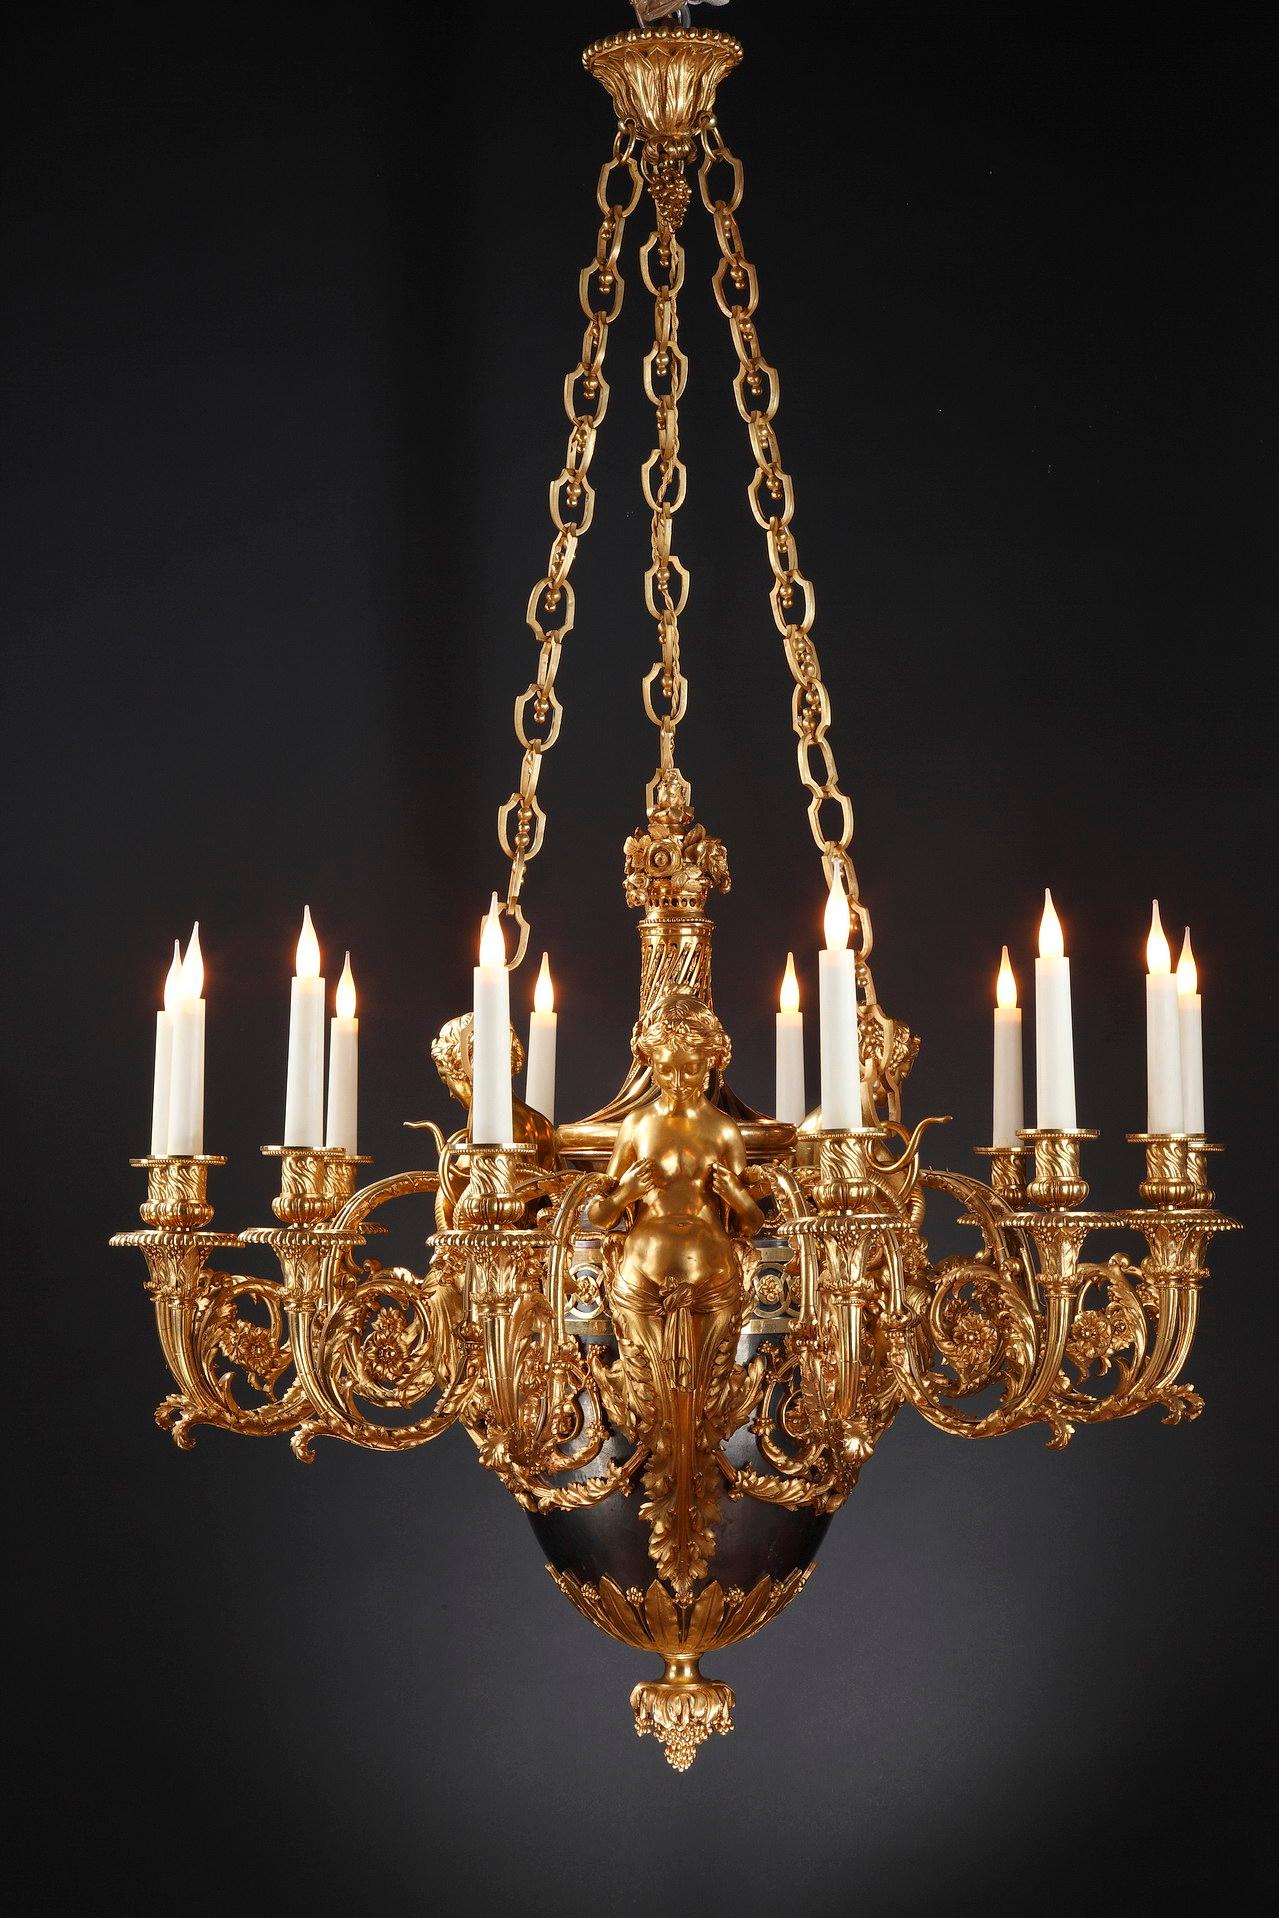 Bear the mark BY (for A.E. Beurdeley)
Magnificent chandelier in chiseled, gilded and patinated bronze, with twelve lights. The shaft consists of an ovoid-shaped vase in blued patinated bronze 